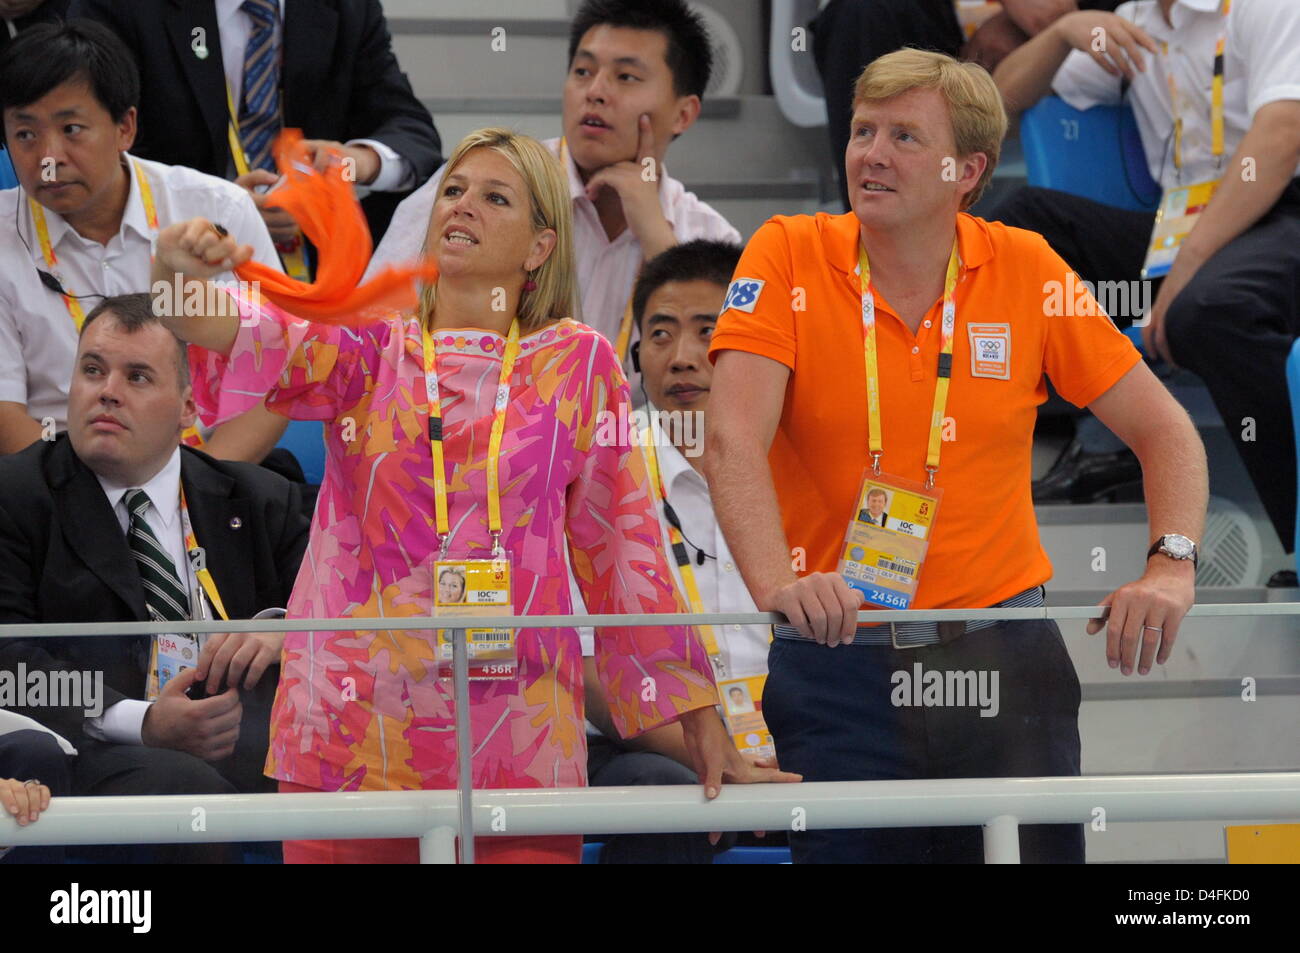 Prince Willem-Alexander and Princess Maxima of the Netherlands celebrate after the Netherlands women's 4x100 freestyle relay team won the gold medal with a time of 3:33.76 during the 2008 Olympics at the National Aquatics Center in Beijing, China 10 August 2008. Photo: Bernd Thissen dpa (c) dpa - Bildfunk Stock Photo